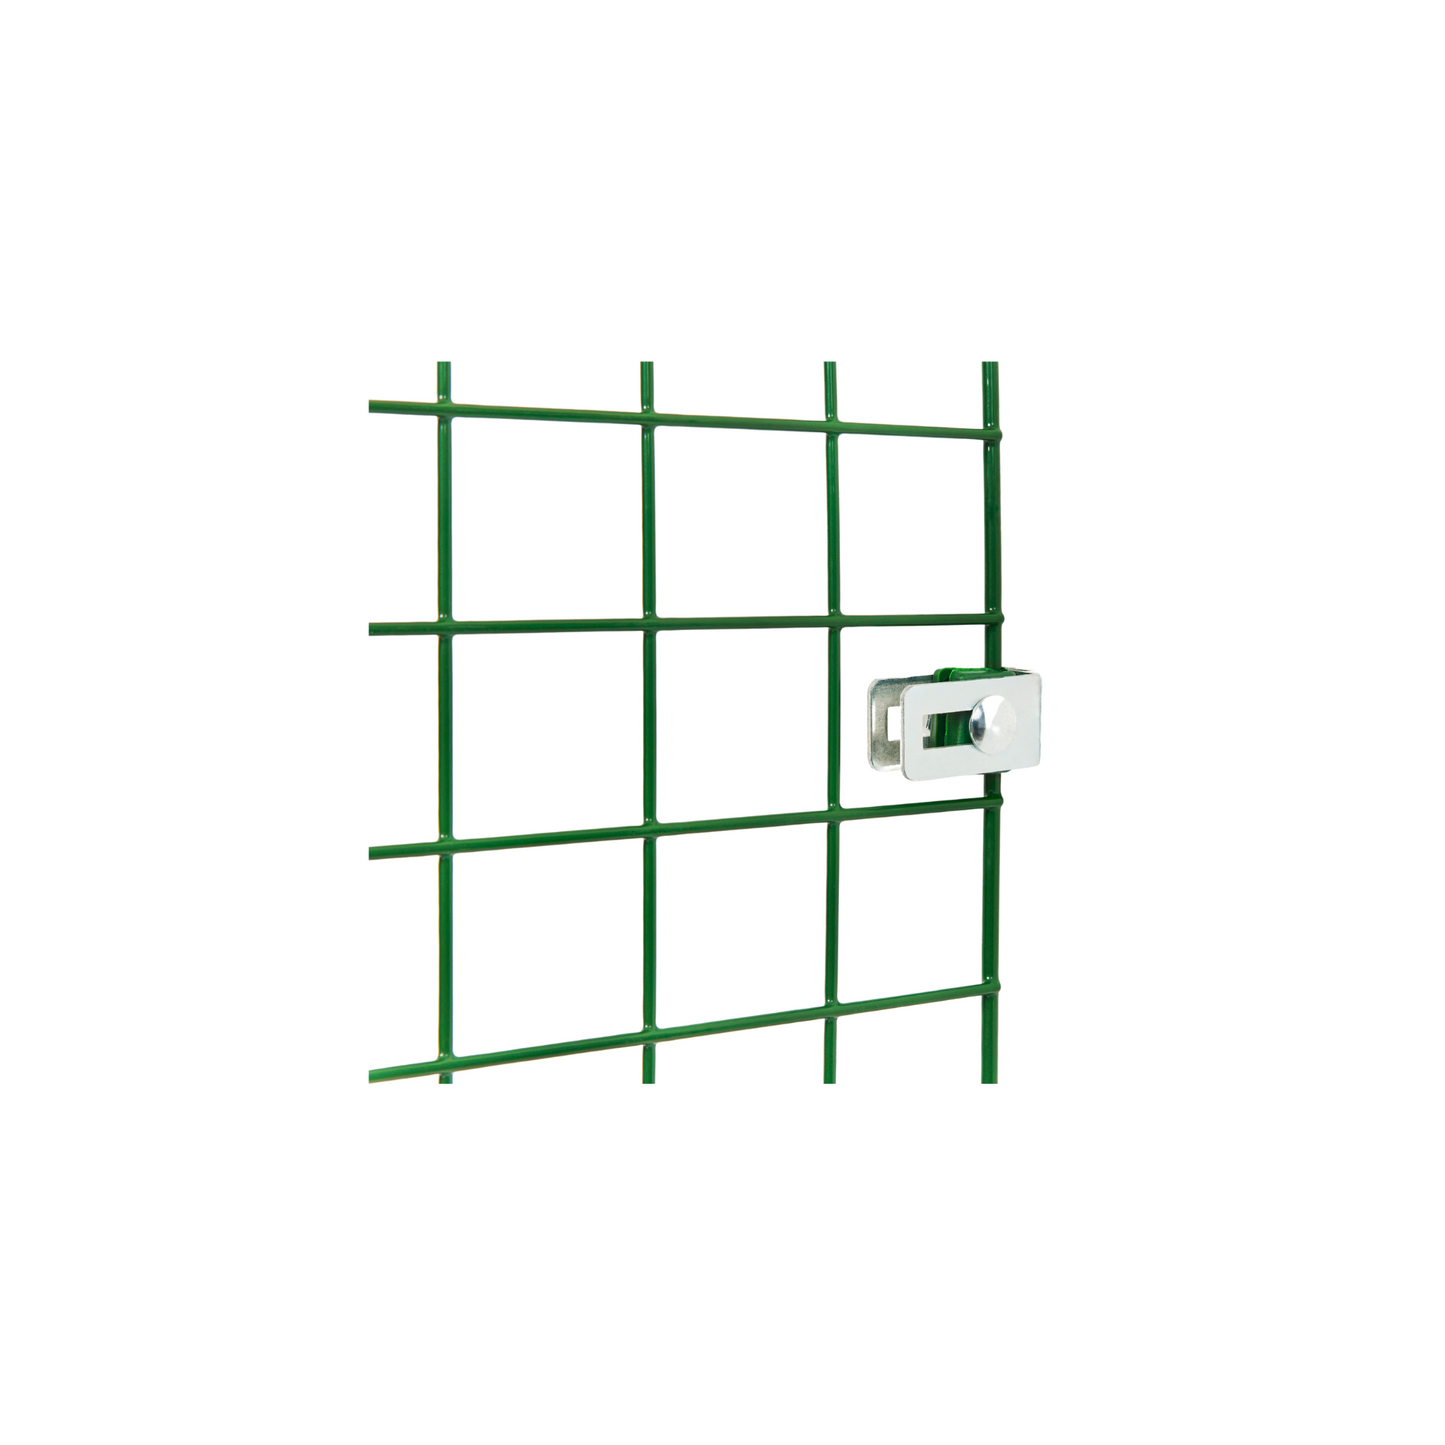 Folding Dog Fence - 75cm High (50mm x 50mm Mesh) Ideal for Puppy/Small Dogs